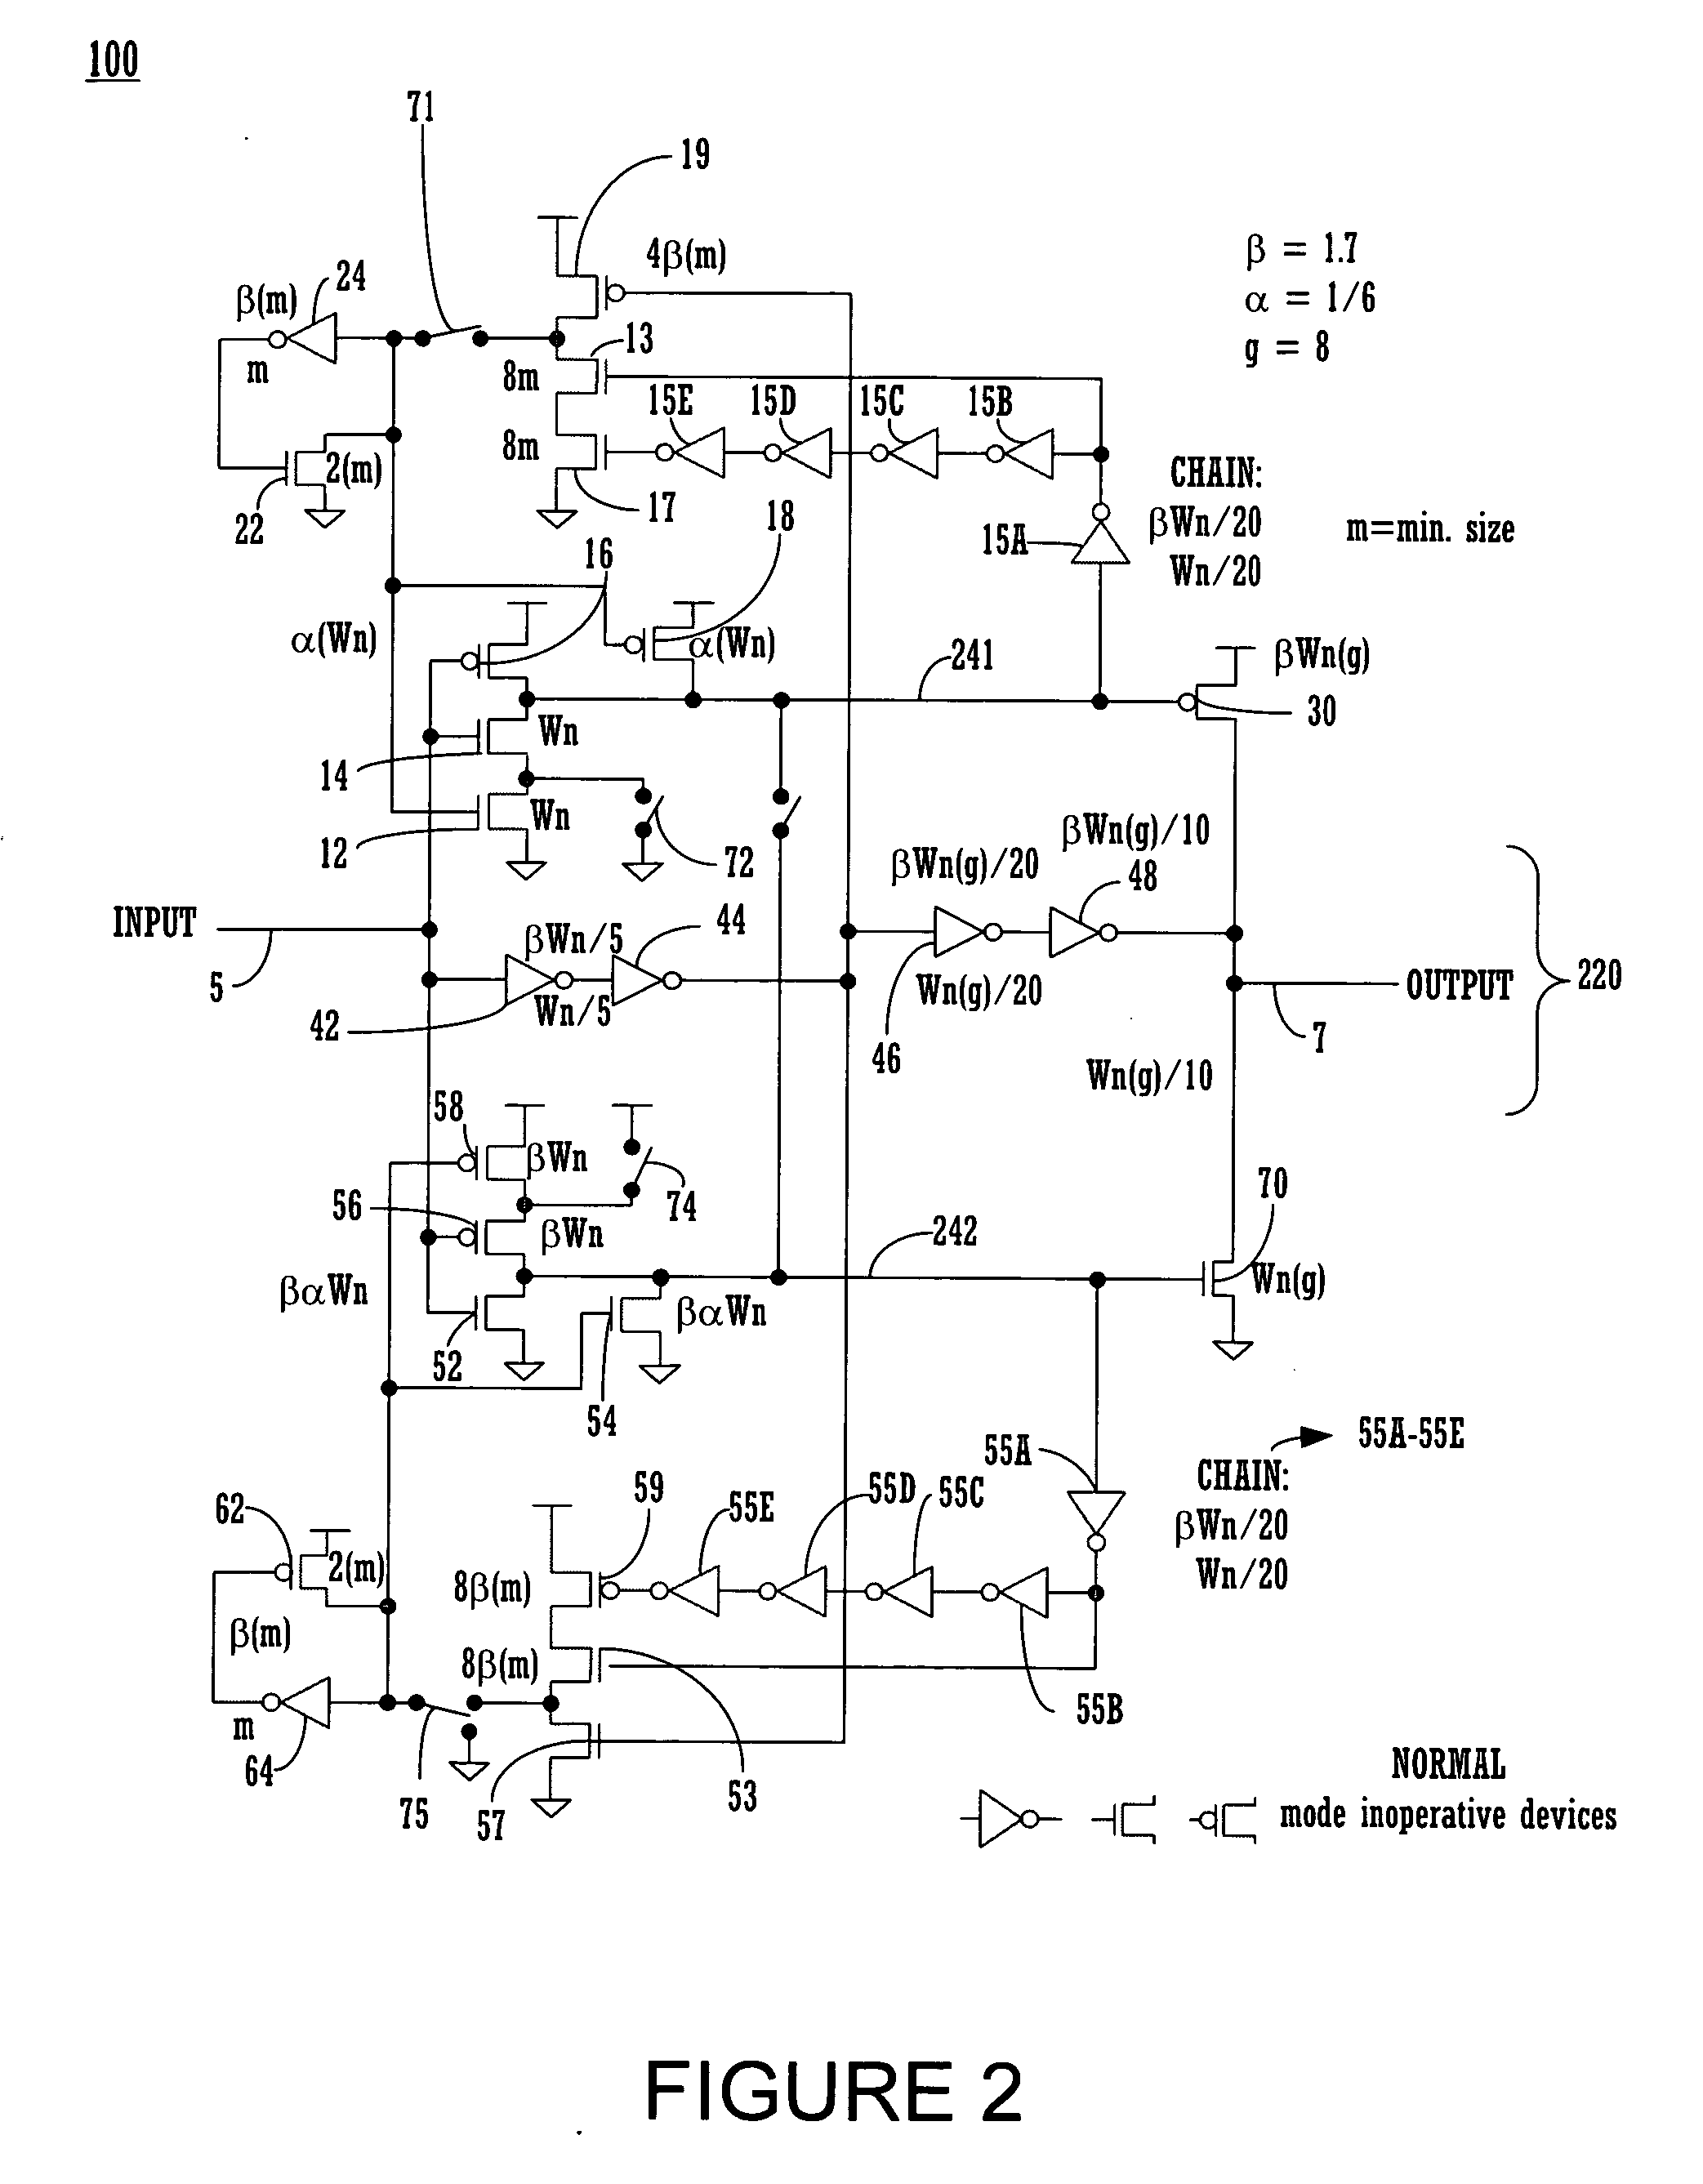 Repeater circuit with high performance repeater mode and normal repeater mode, wherein high performance repeater mode has fast reset capability